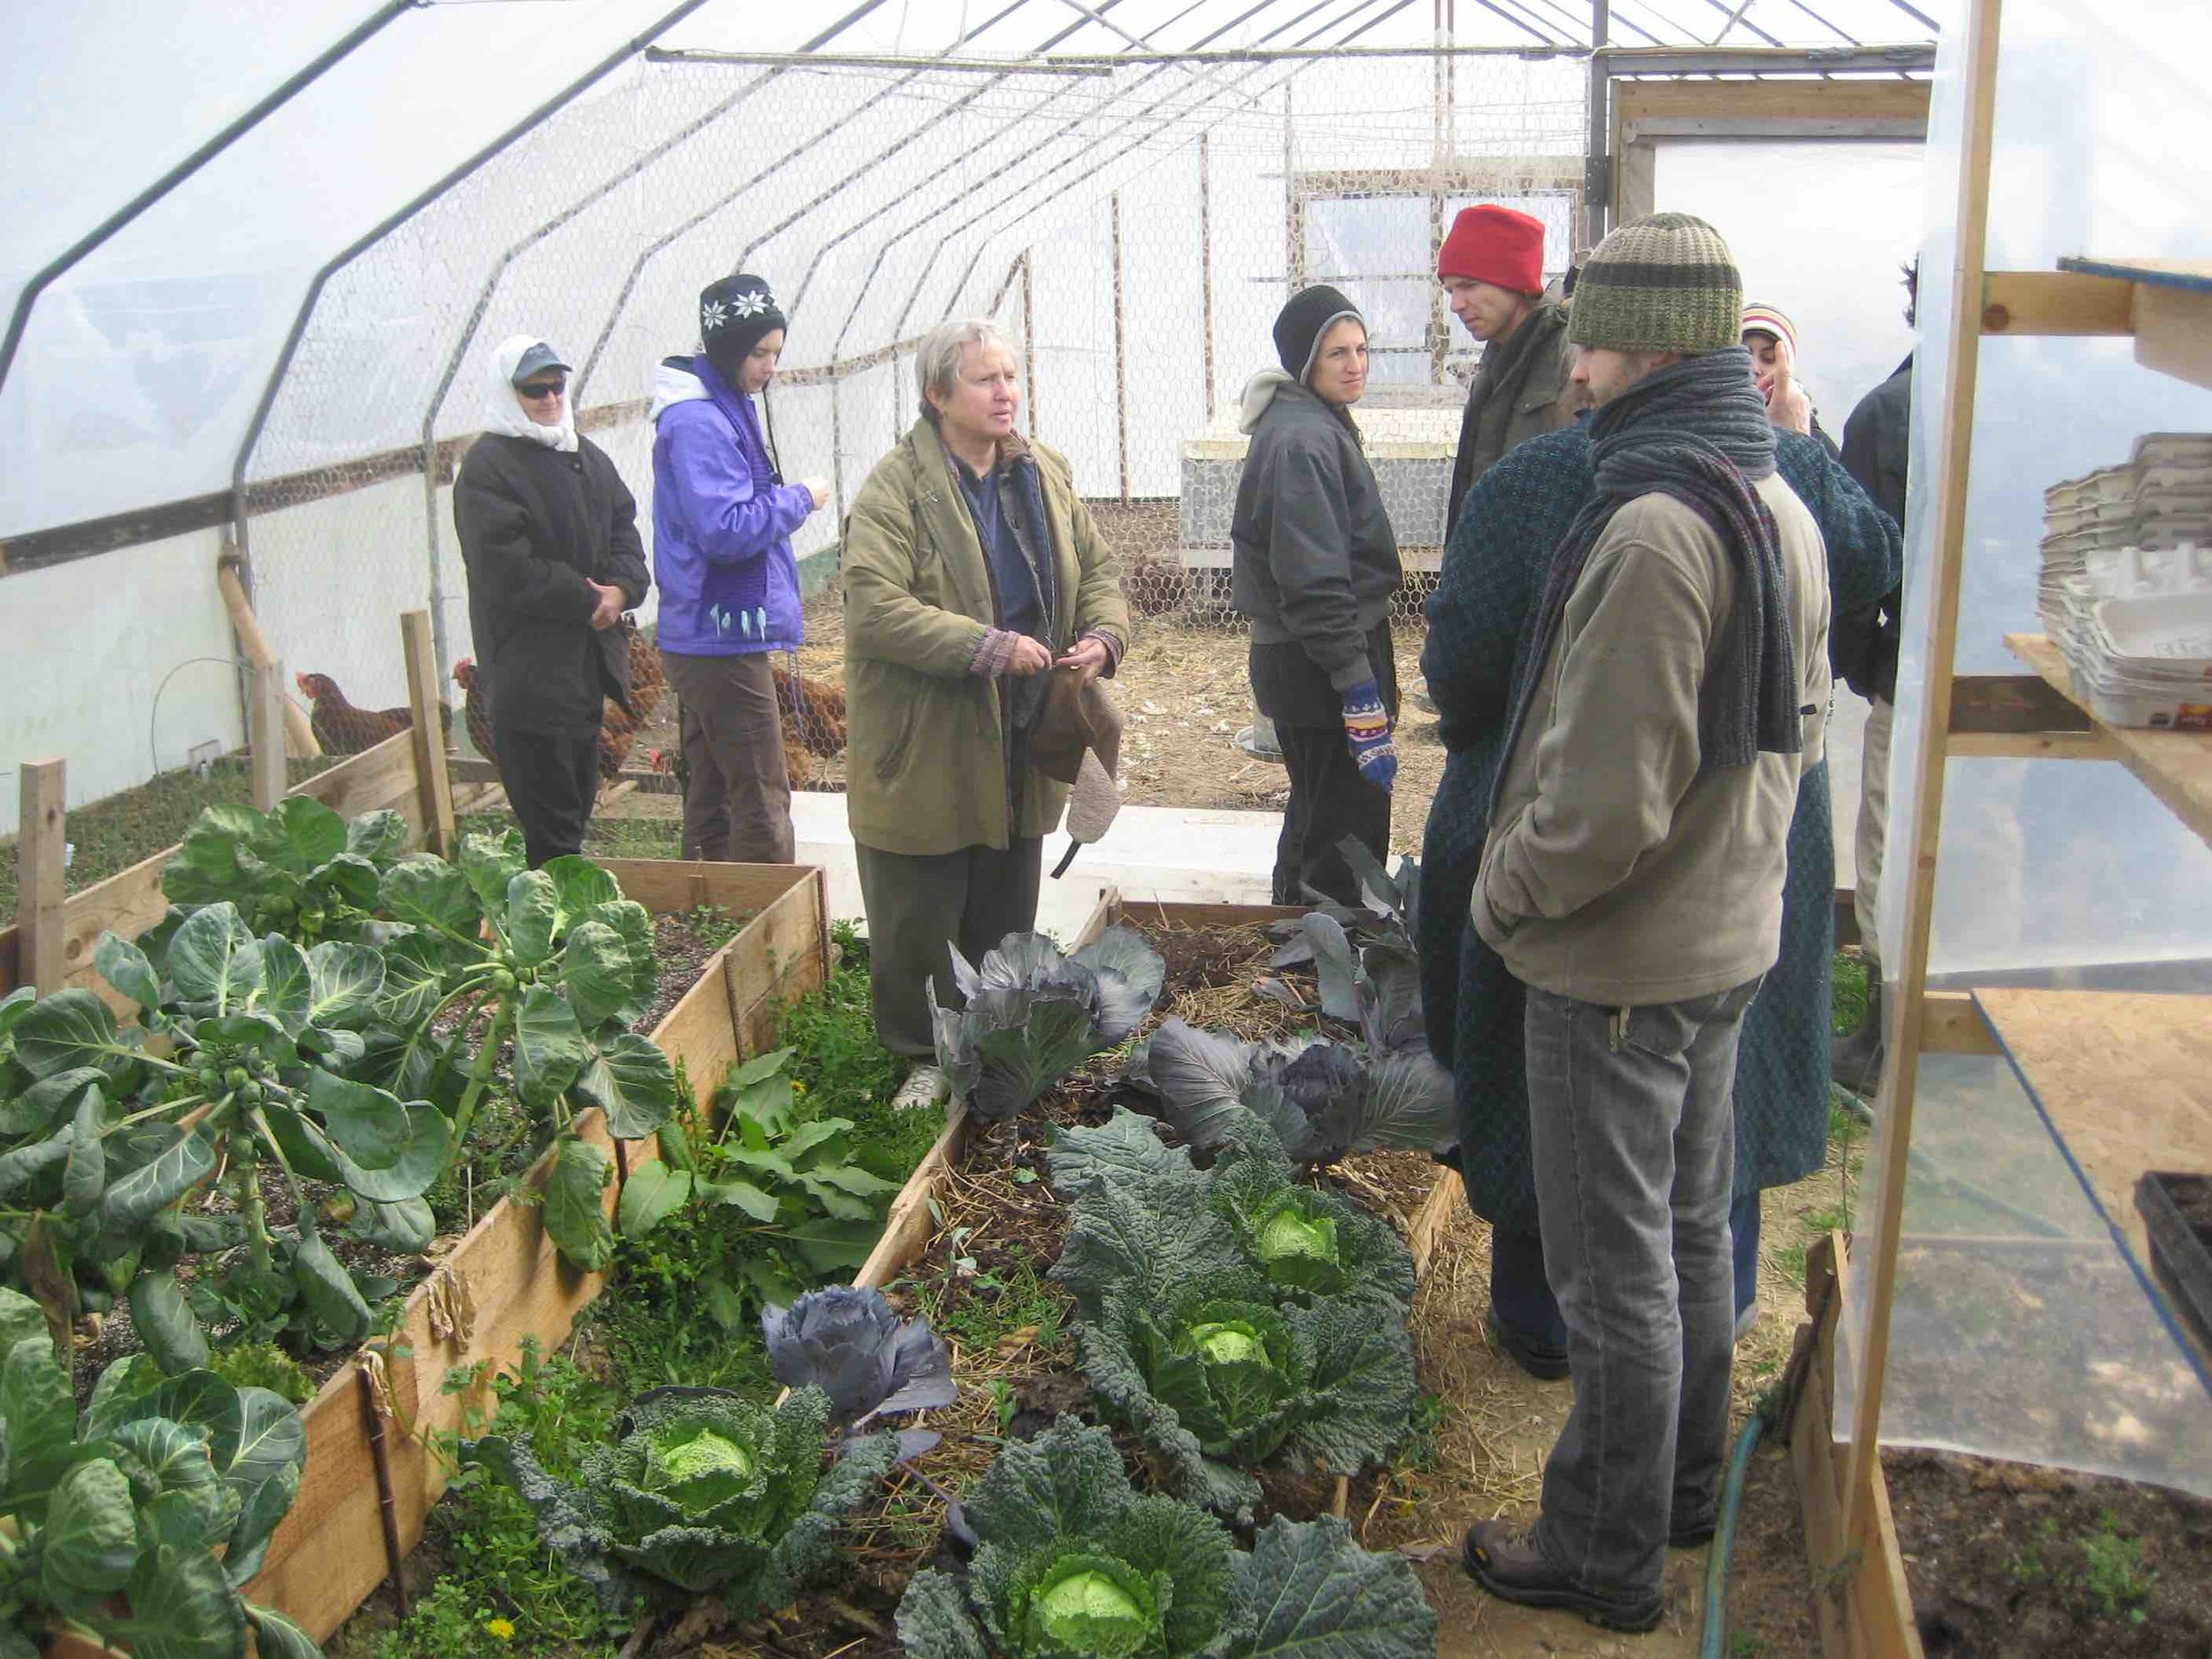 Students learning about Winter Crops at Greensleeves Farm